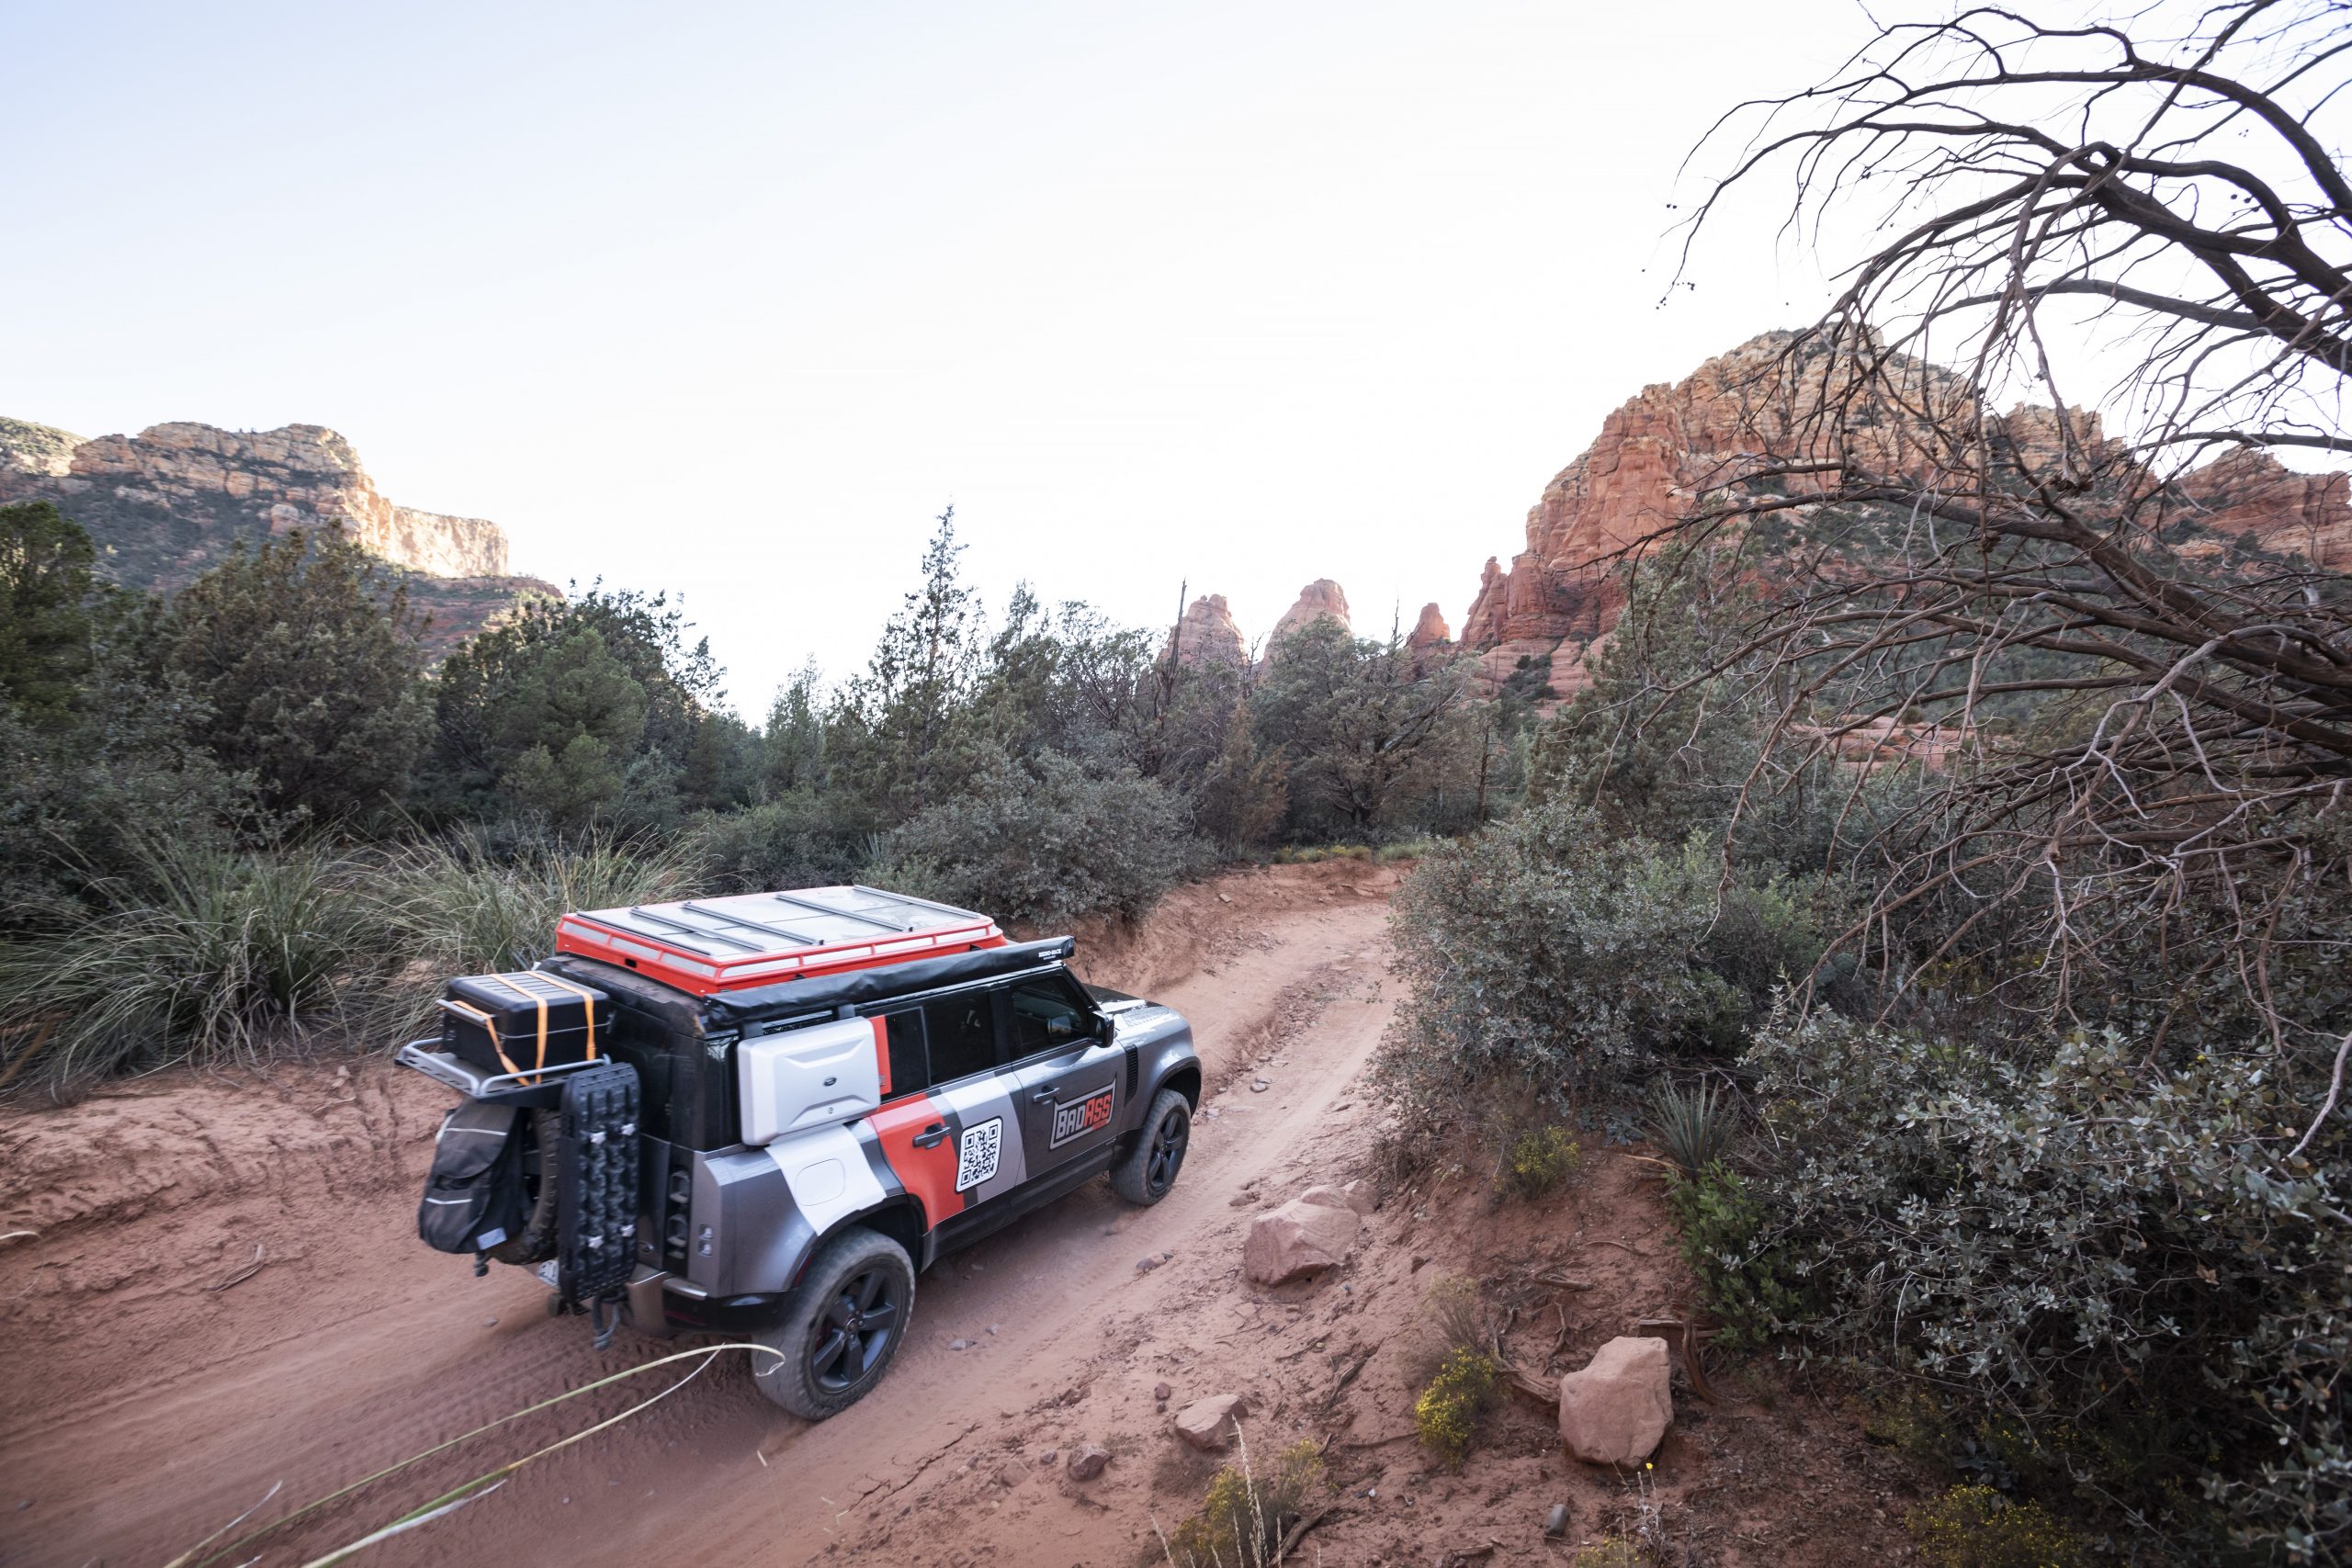 Badass Tents® CONVOY™ Roof Rack Tent Features Classic Off-road Style & Modern Performance